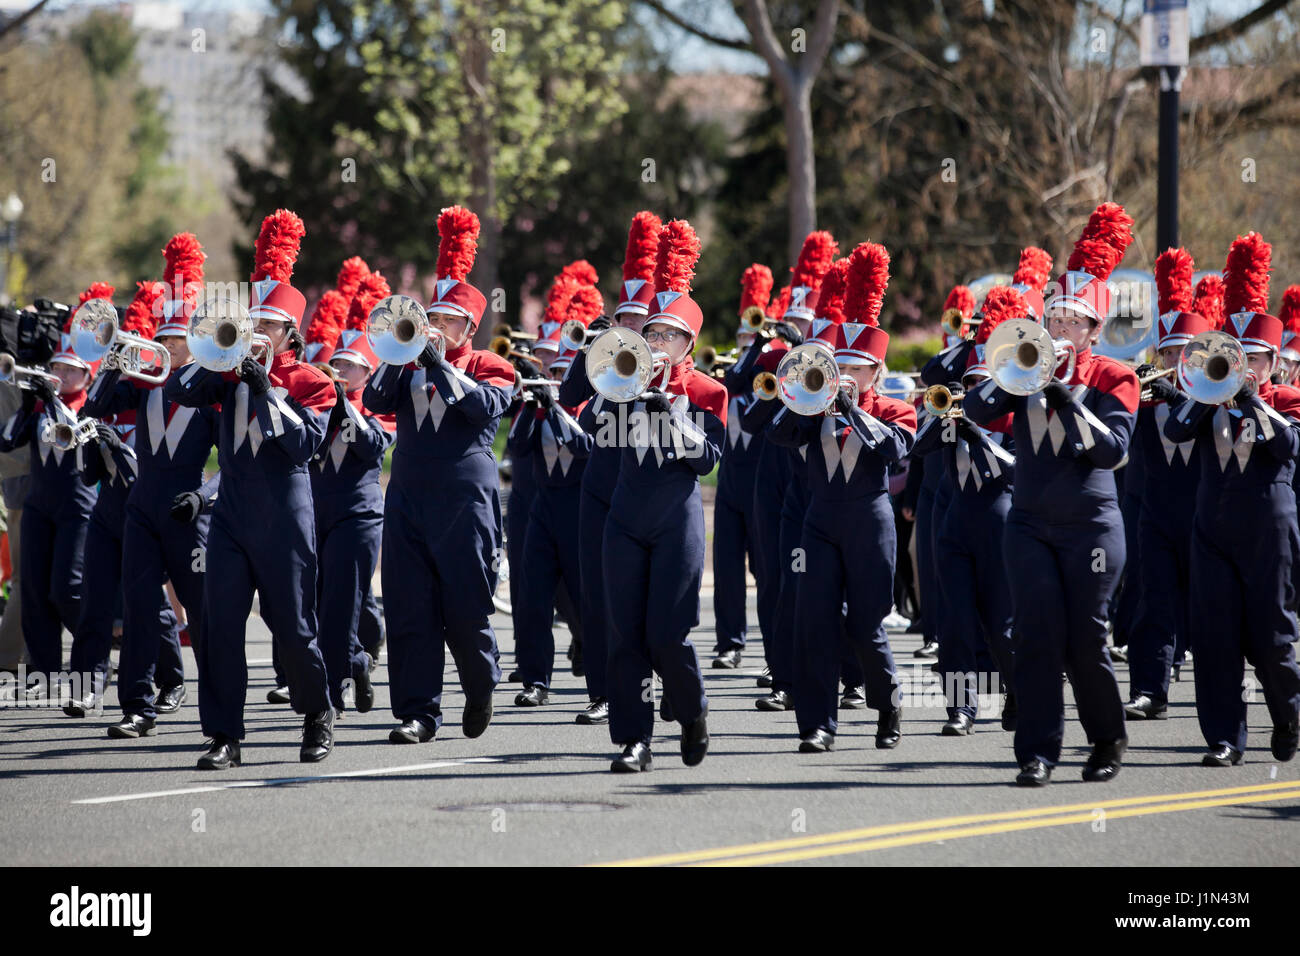 High school marching band trumpet players during parade - USA Stock Photo